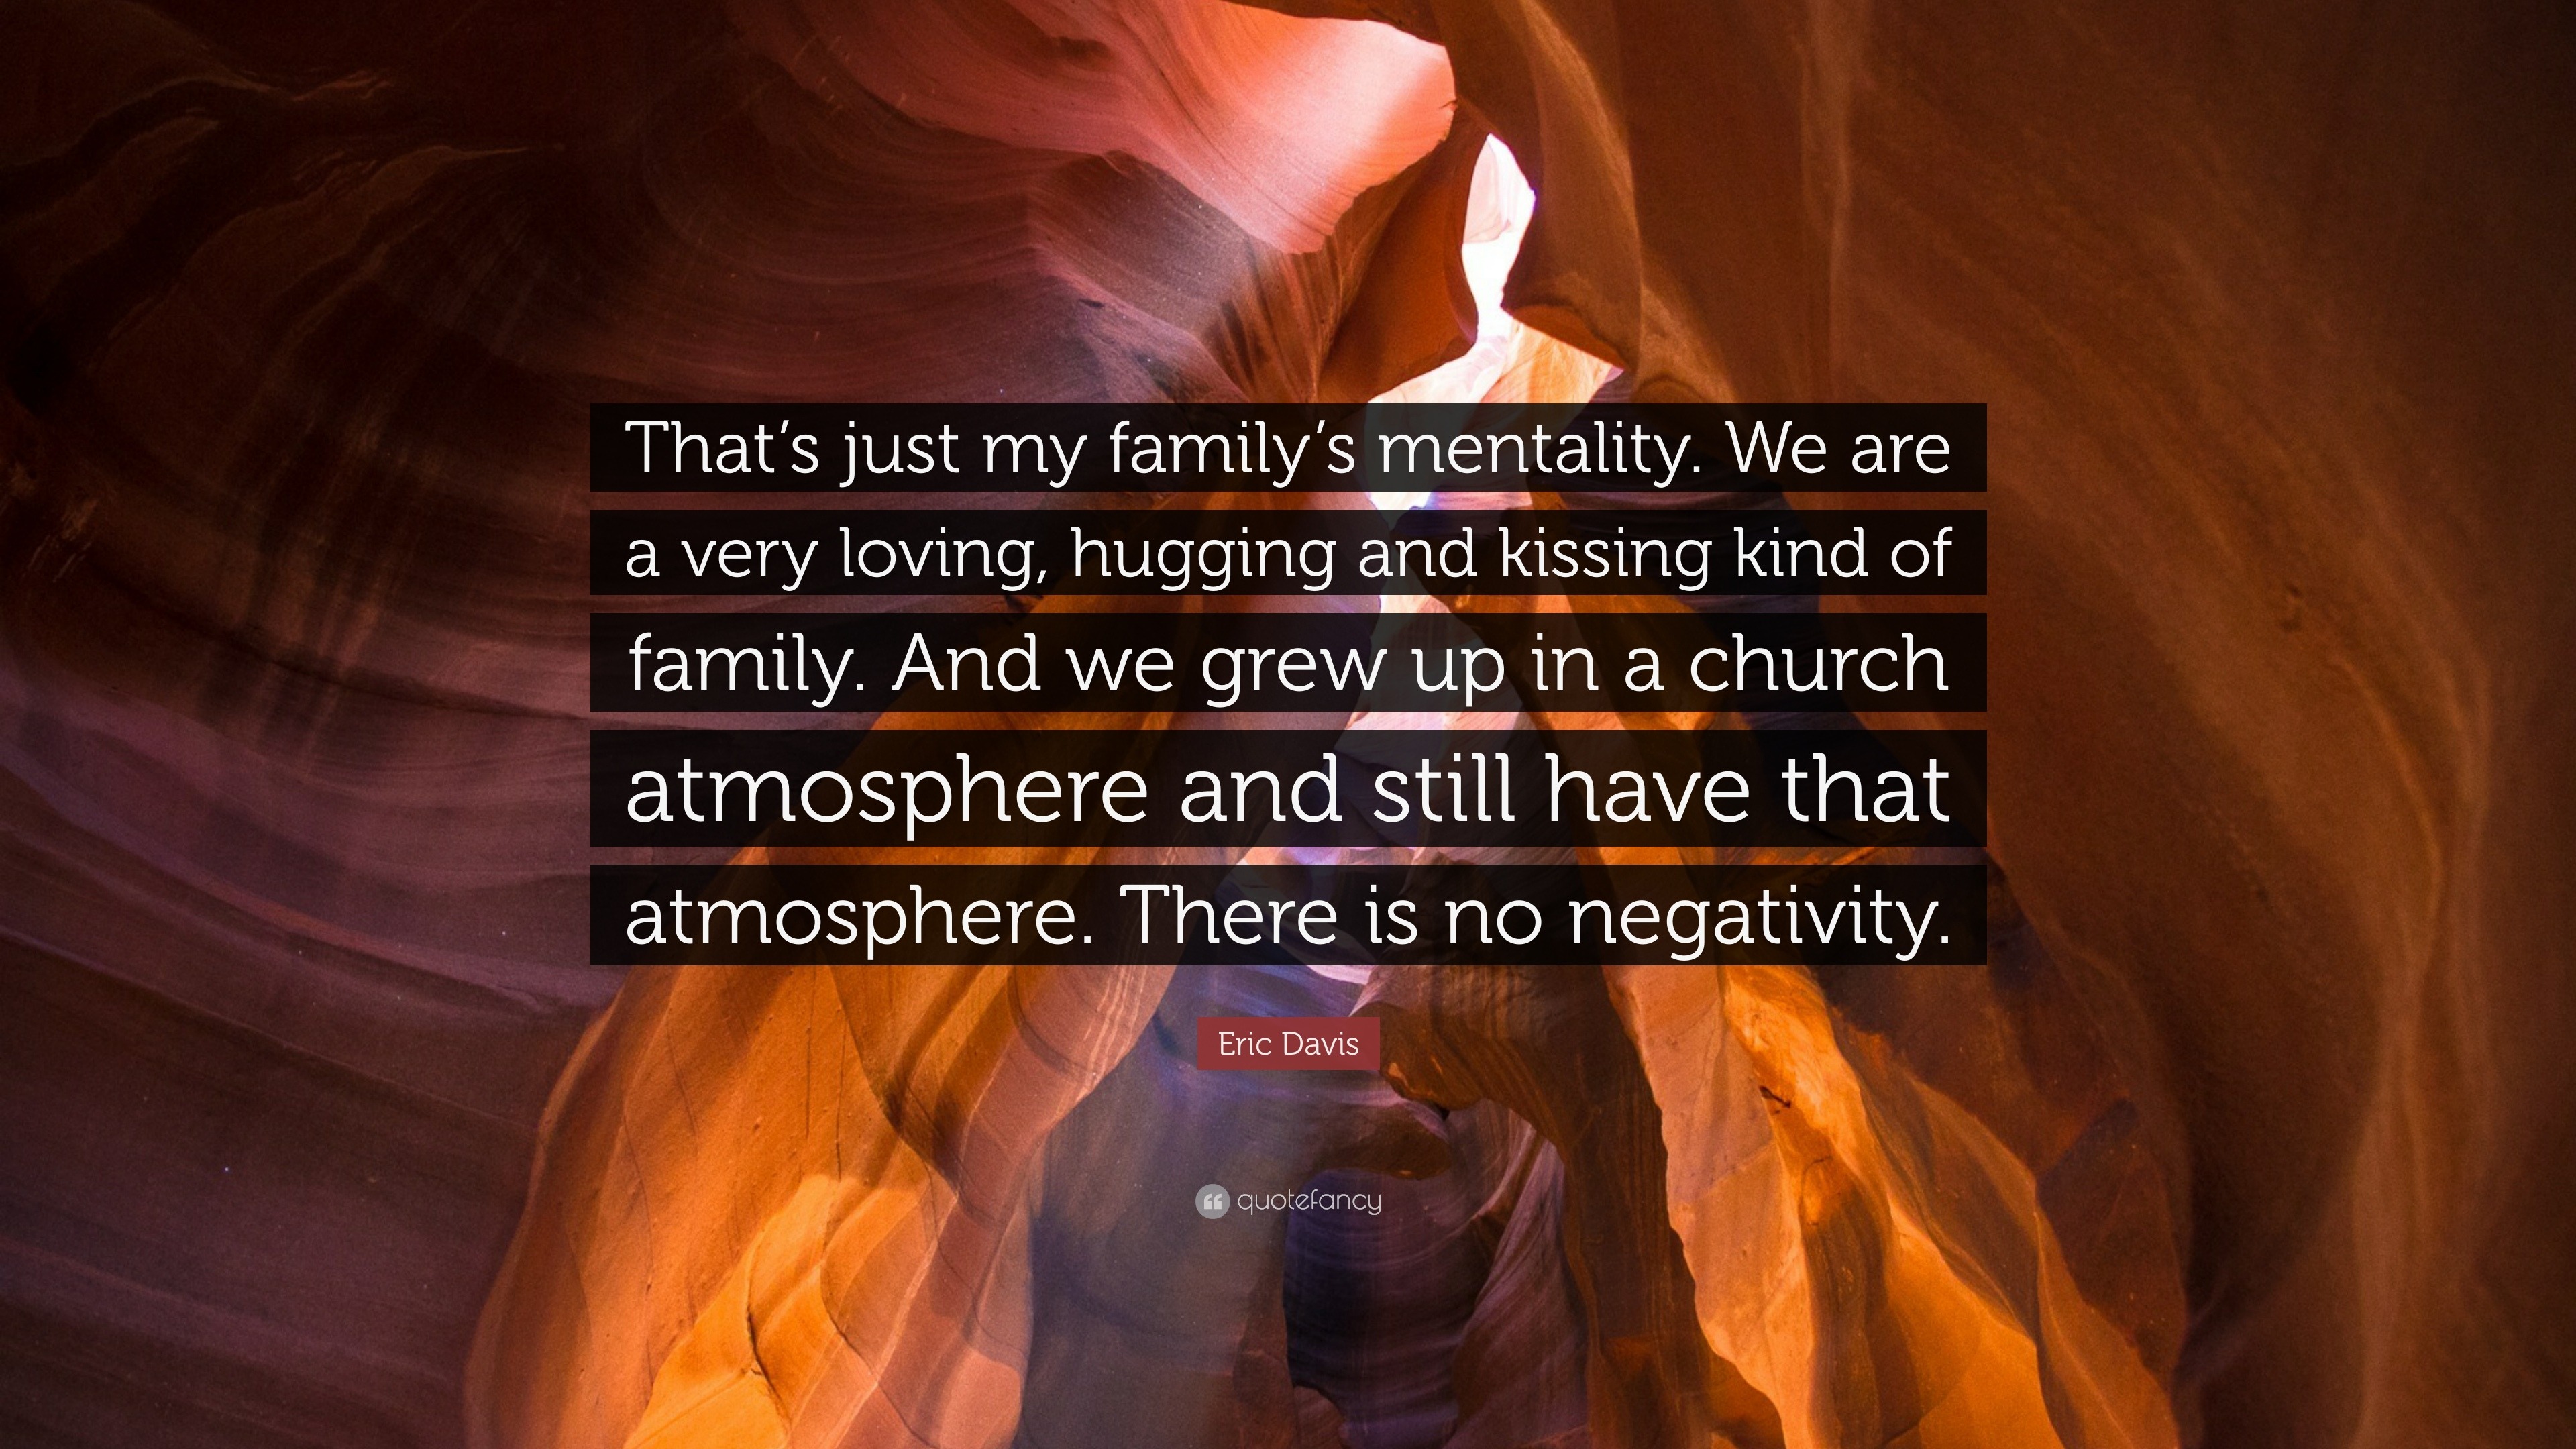 Eric Davis Quote: “That's just my family's mentality. We are a